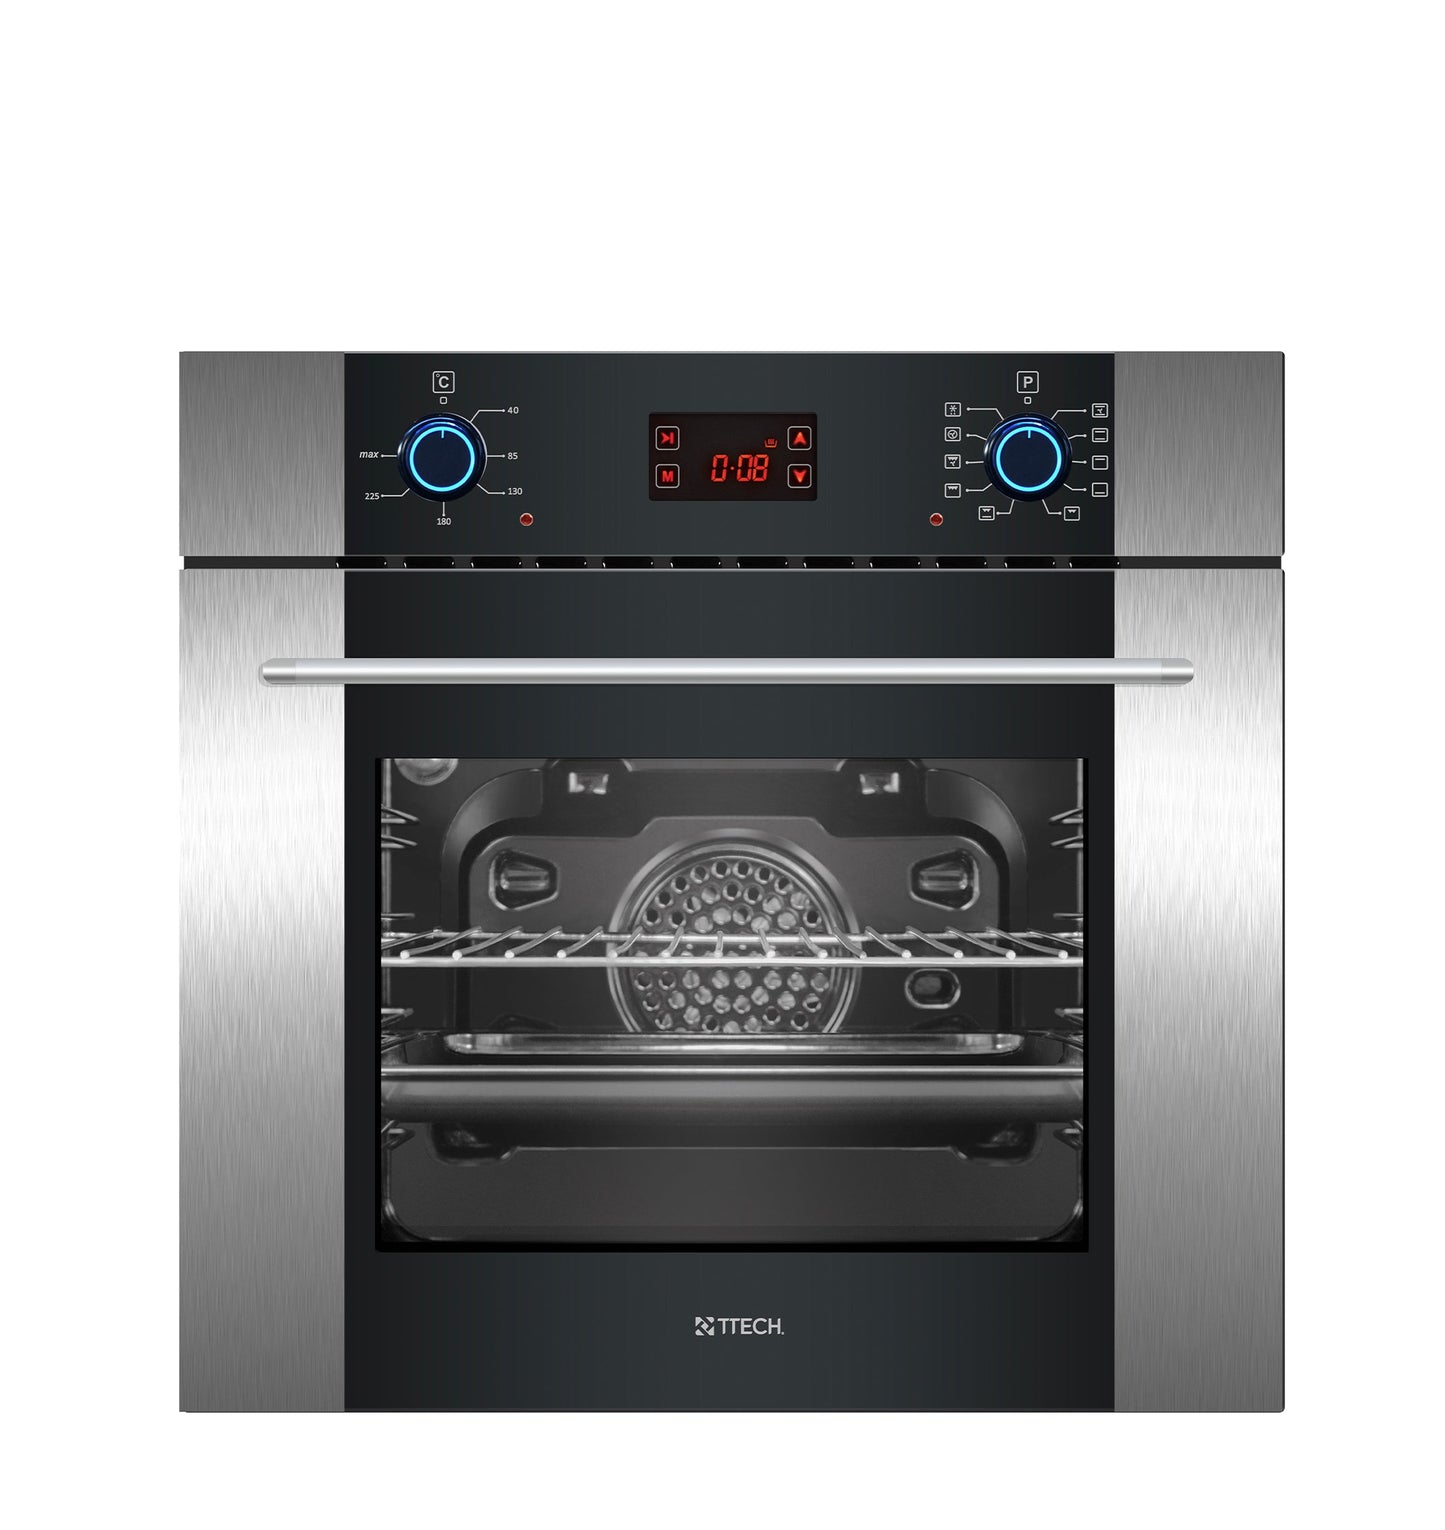 T-TECH 60CM ELECTRICAL BUILT-IN OVEN, 64 LTRS. INTERNAL VOLUME, UP & DOWN HEATING ELEMENTS, GRILL RESISTANCE, 2 OVEN TRAYS, DIGITAL TOUCH PROGRAMMER, BLACK GLASS CONTROL PANEL WITH LEFT & RIGHT BOLD INOX STRIPES - BE10 LDIL